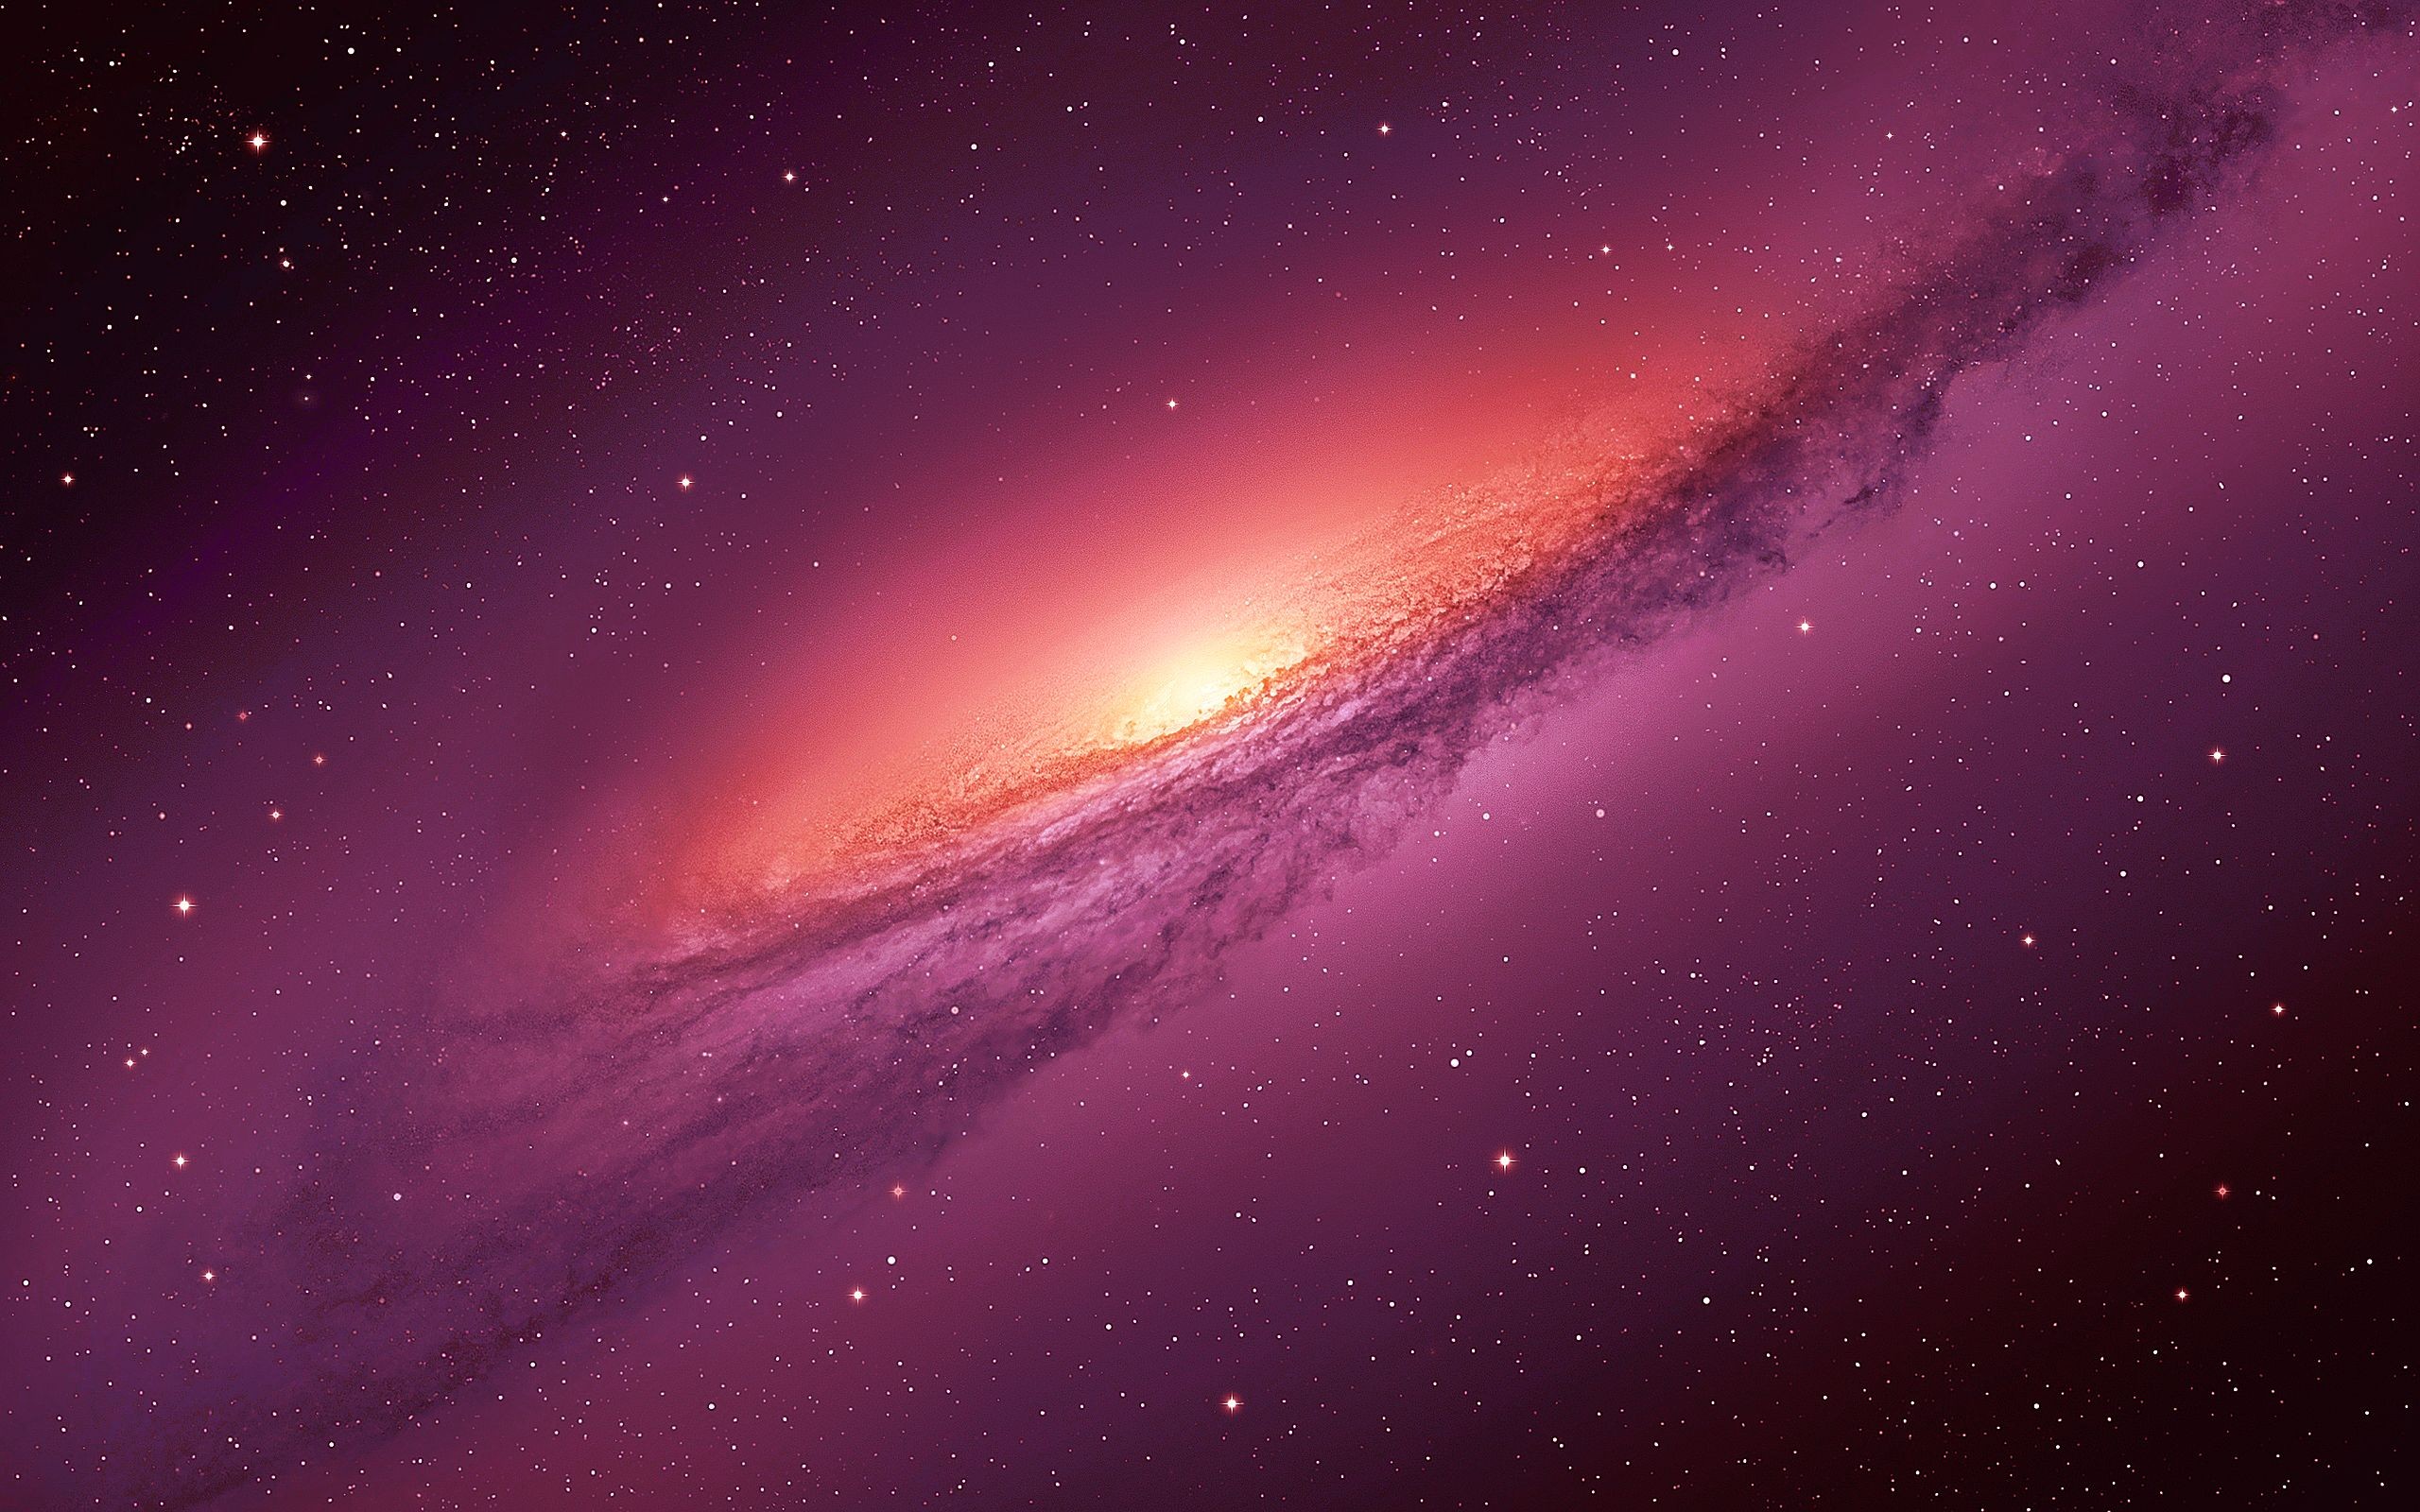  HD  wallpaper  Space    Download free awesome backgrounds  